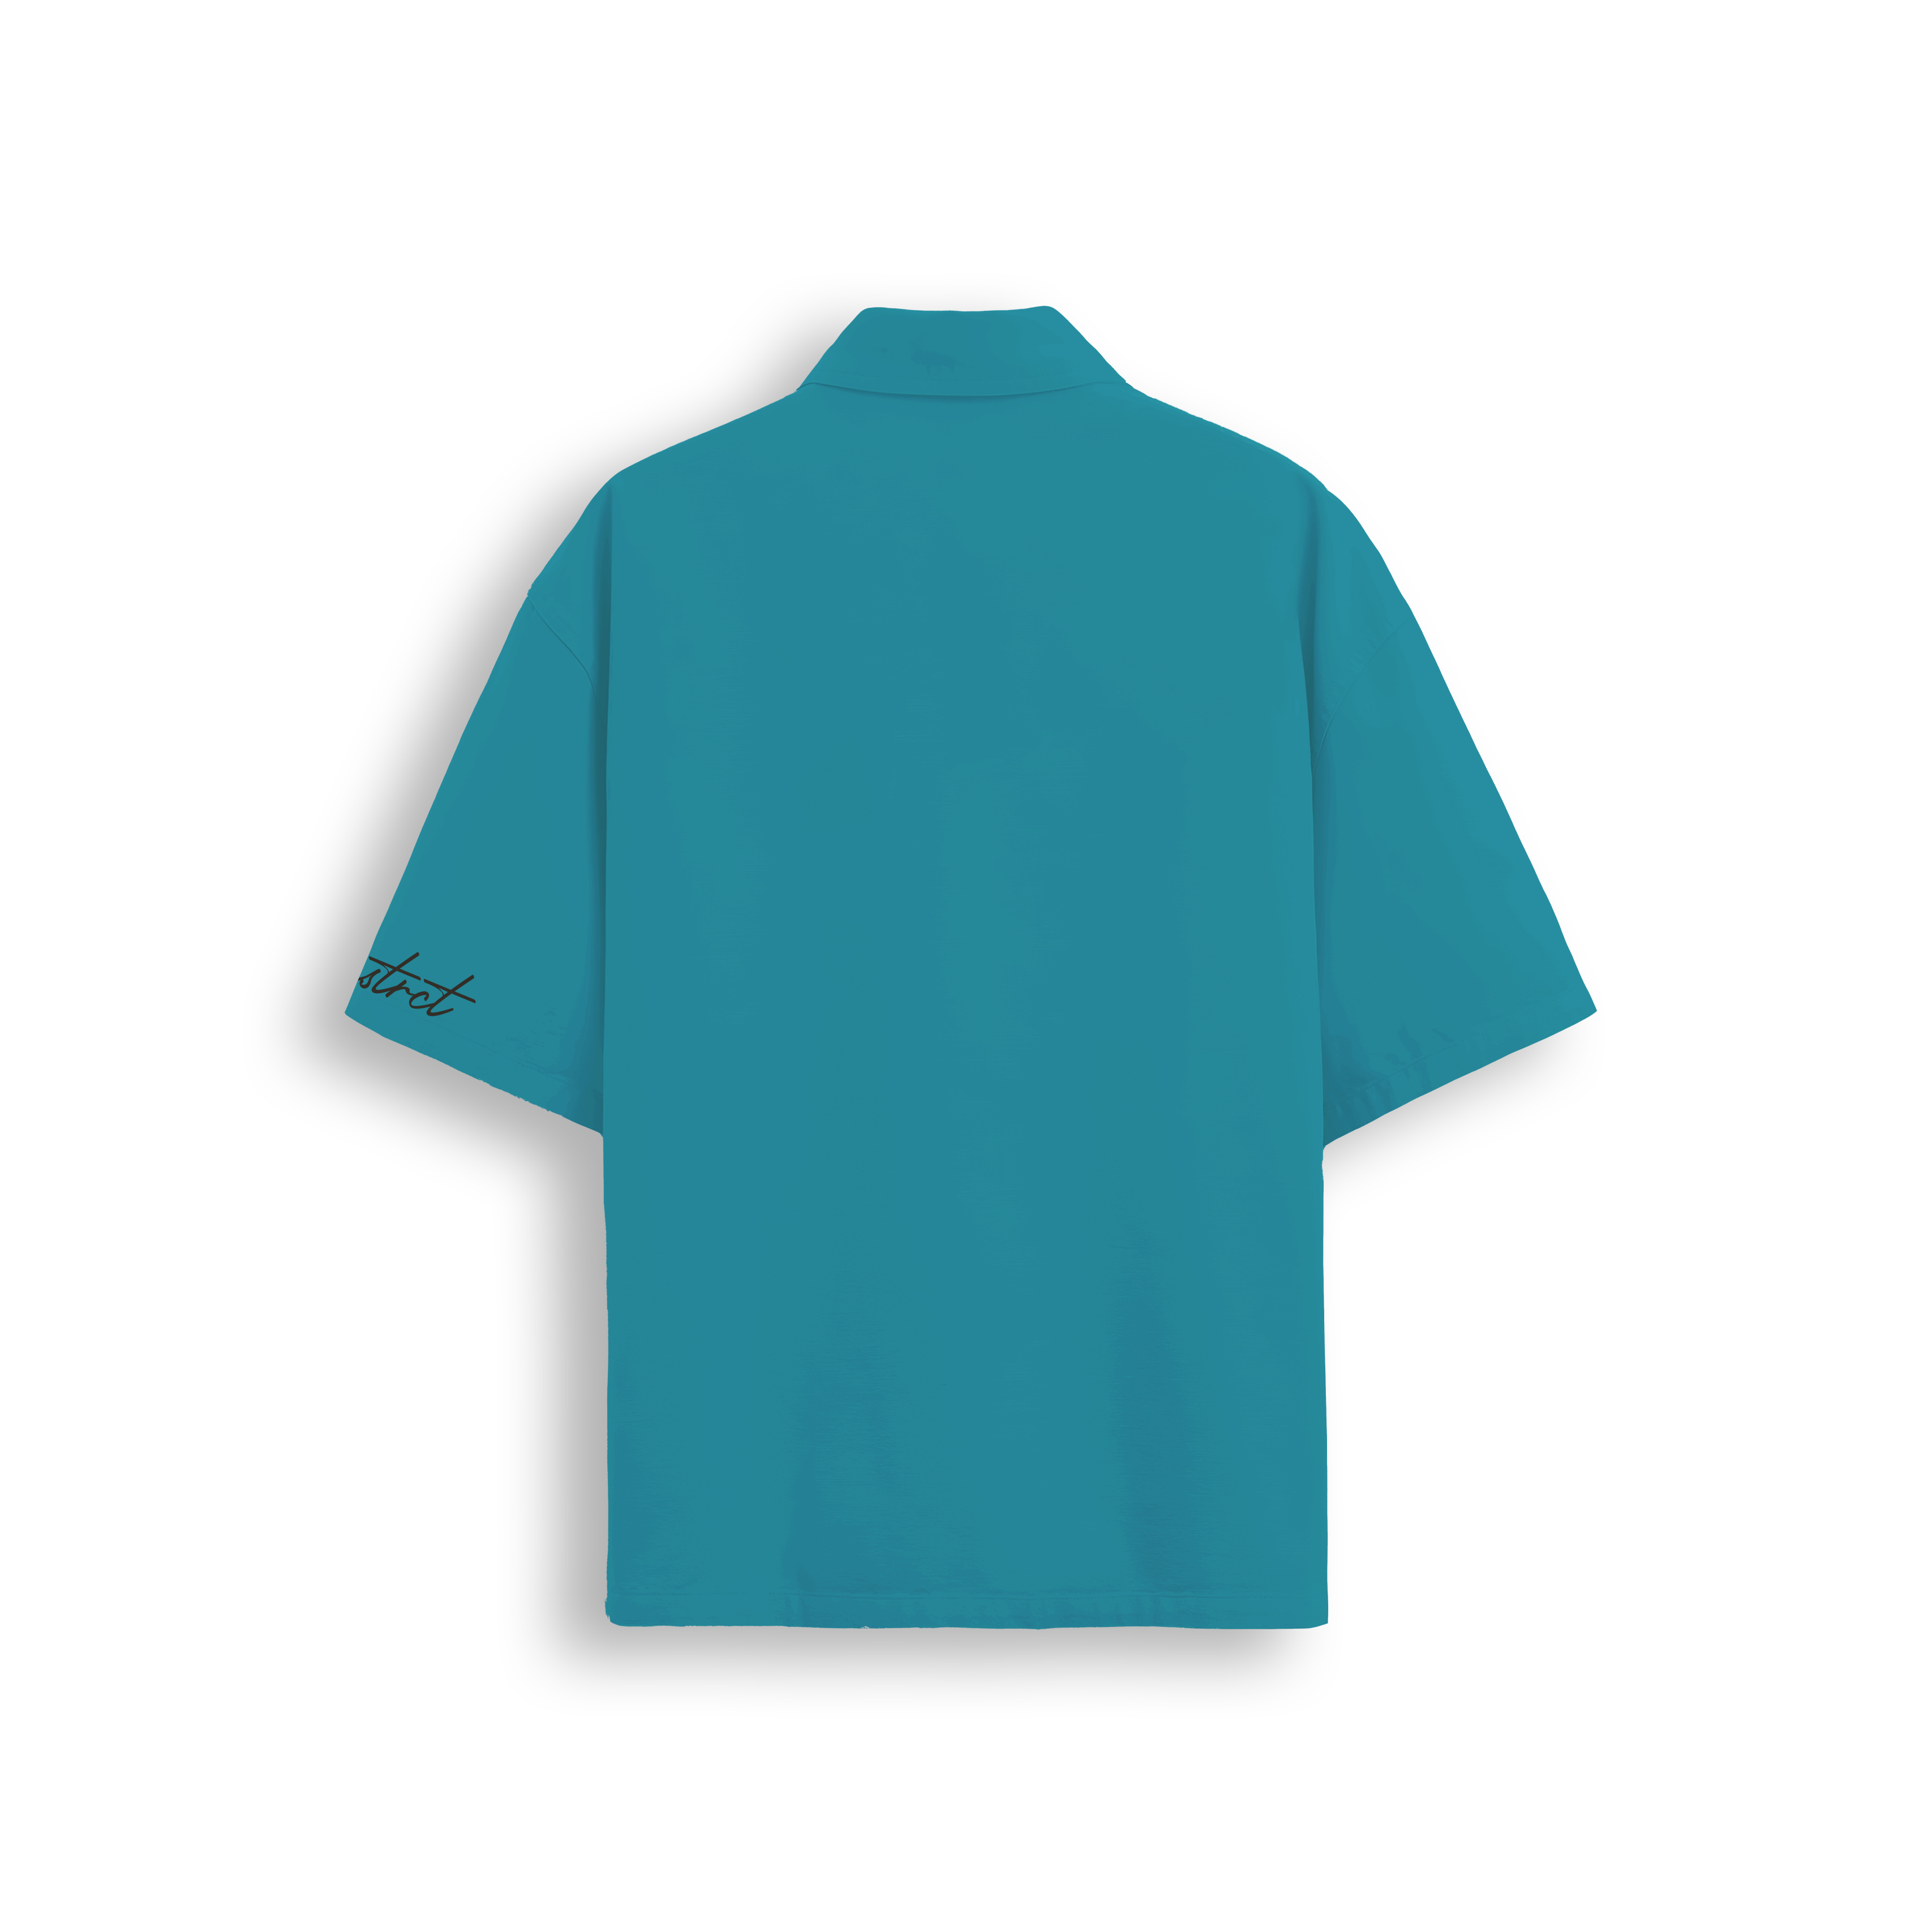 Wealth whisphers shirt - Teal blue